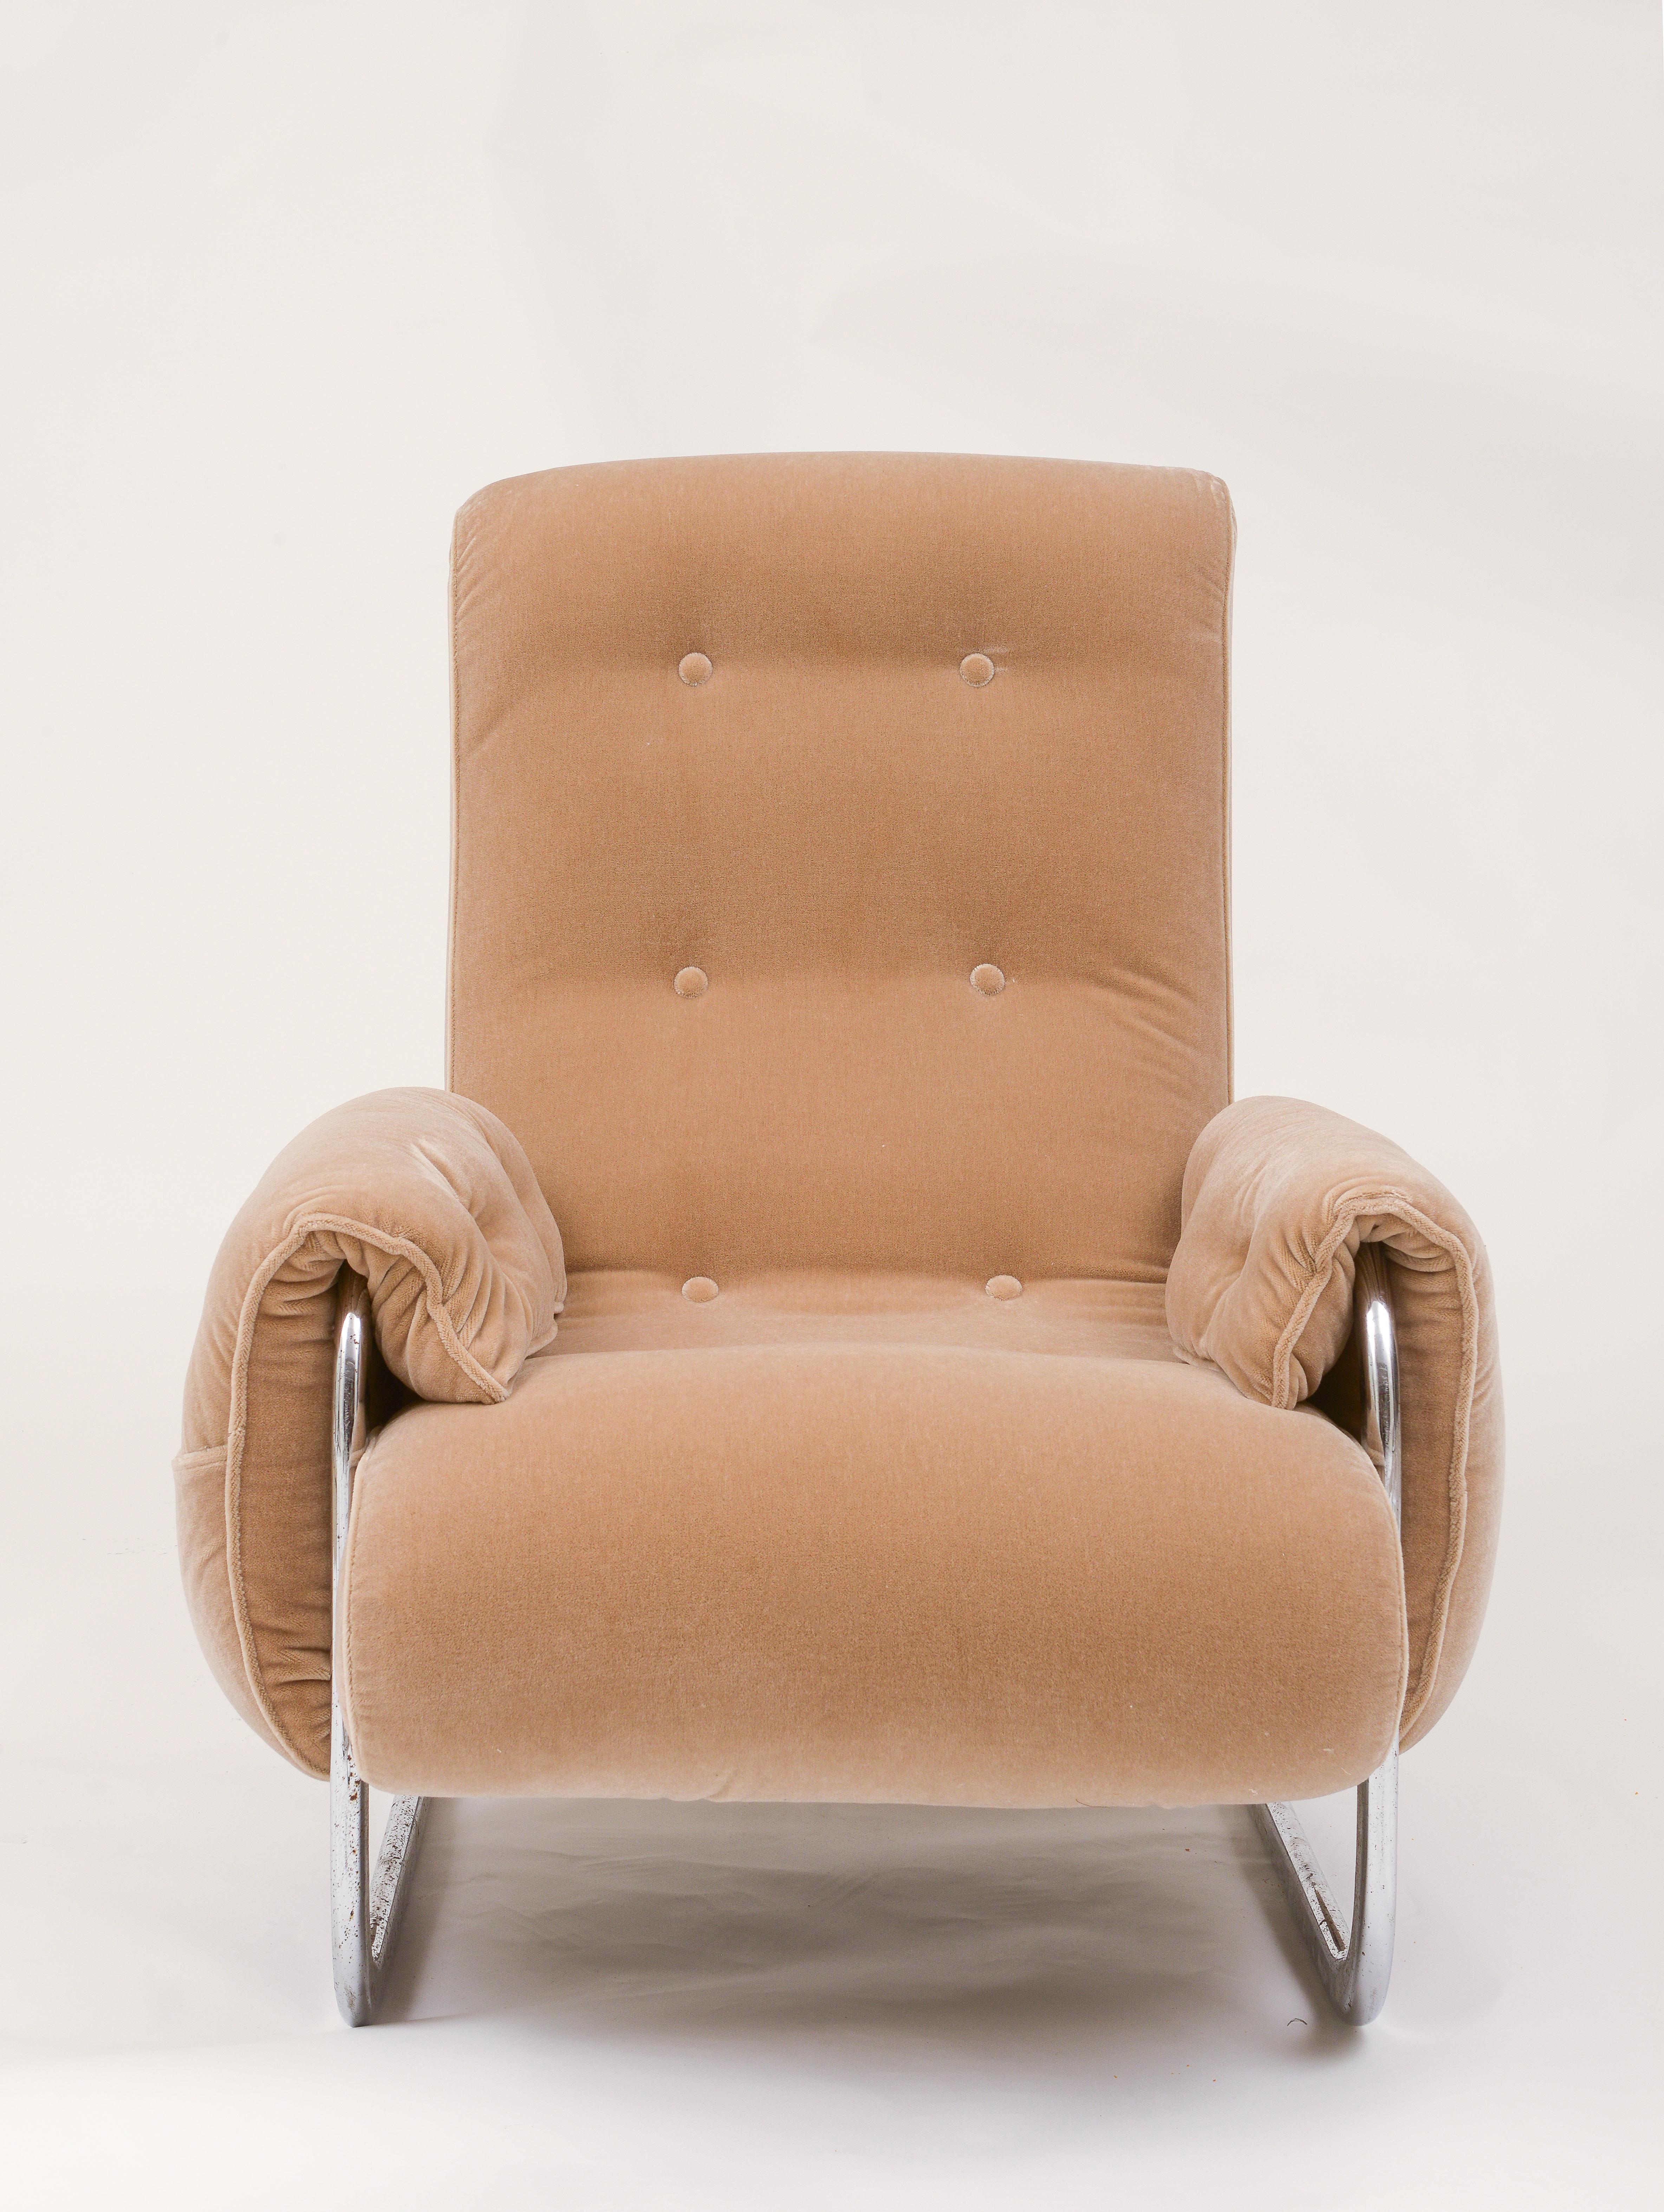 Tan brown mohair velvet large lounge chairs, Guido Faleschini, 1970's, Italy
This is a big and comfortable stylish pair of lounge chairs that looks great in any decor.